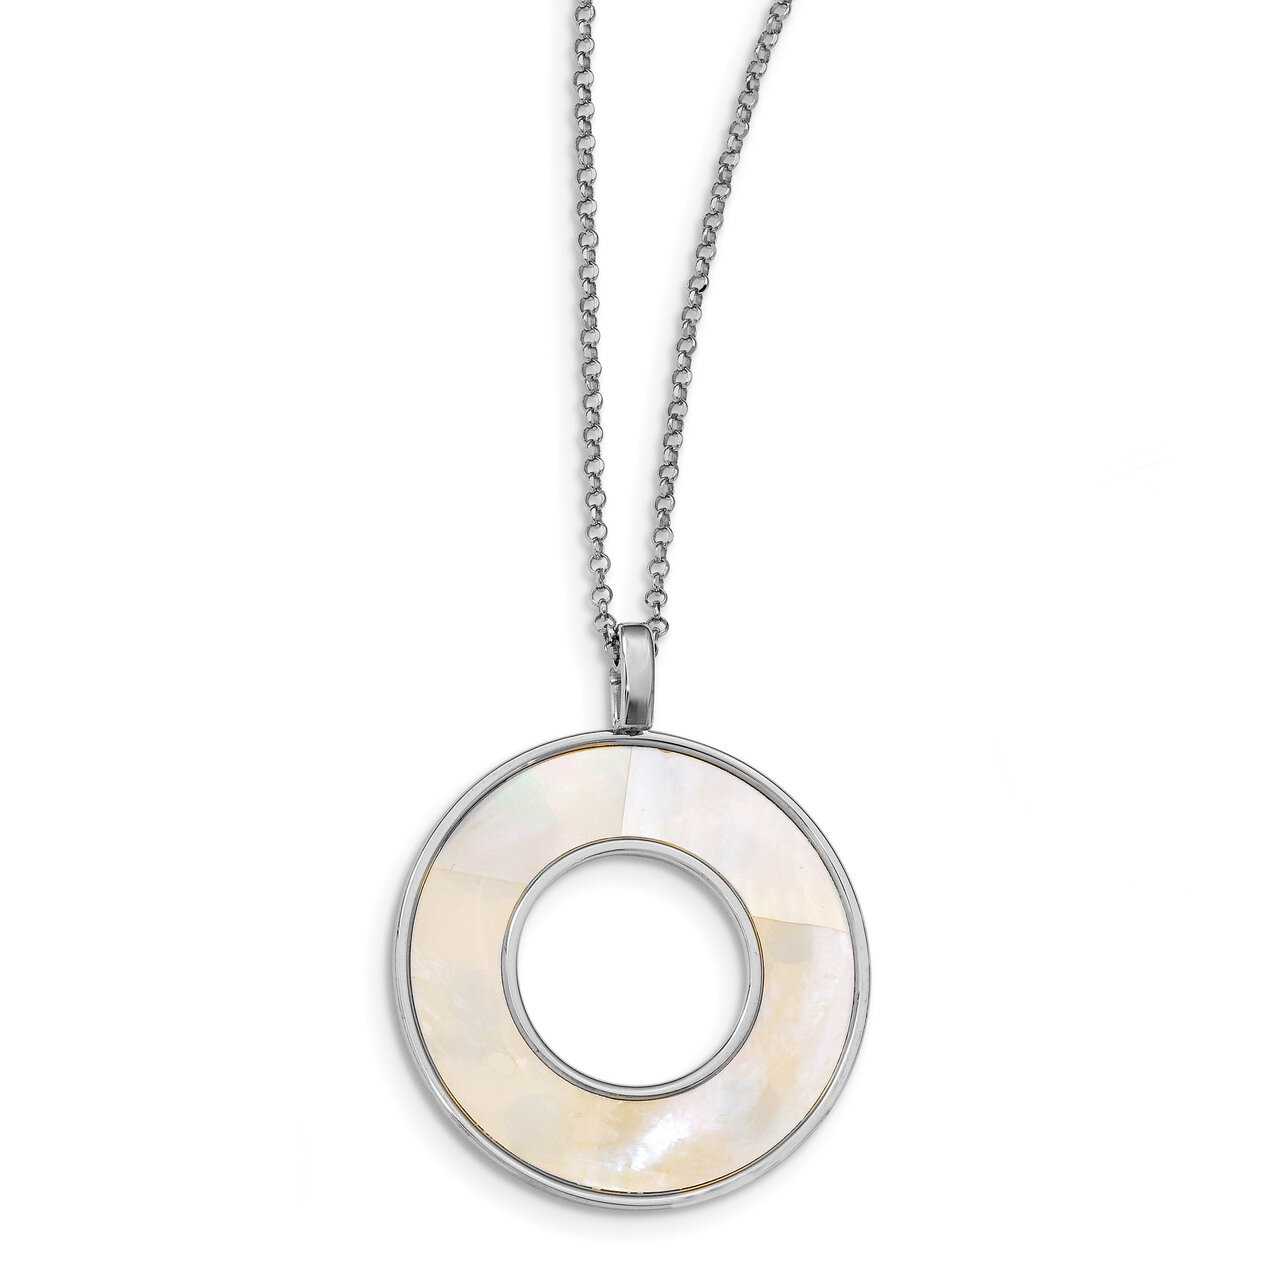 Mother of Pearl Circle Pendant Necklace 23.5 Inch Sterling Silver HB-QLF950-23.5